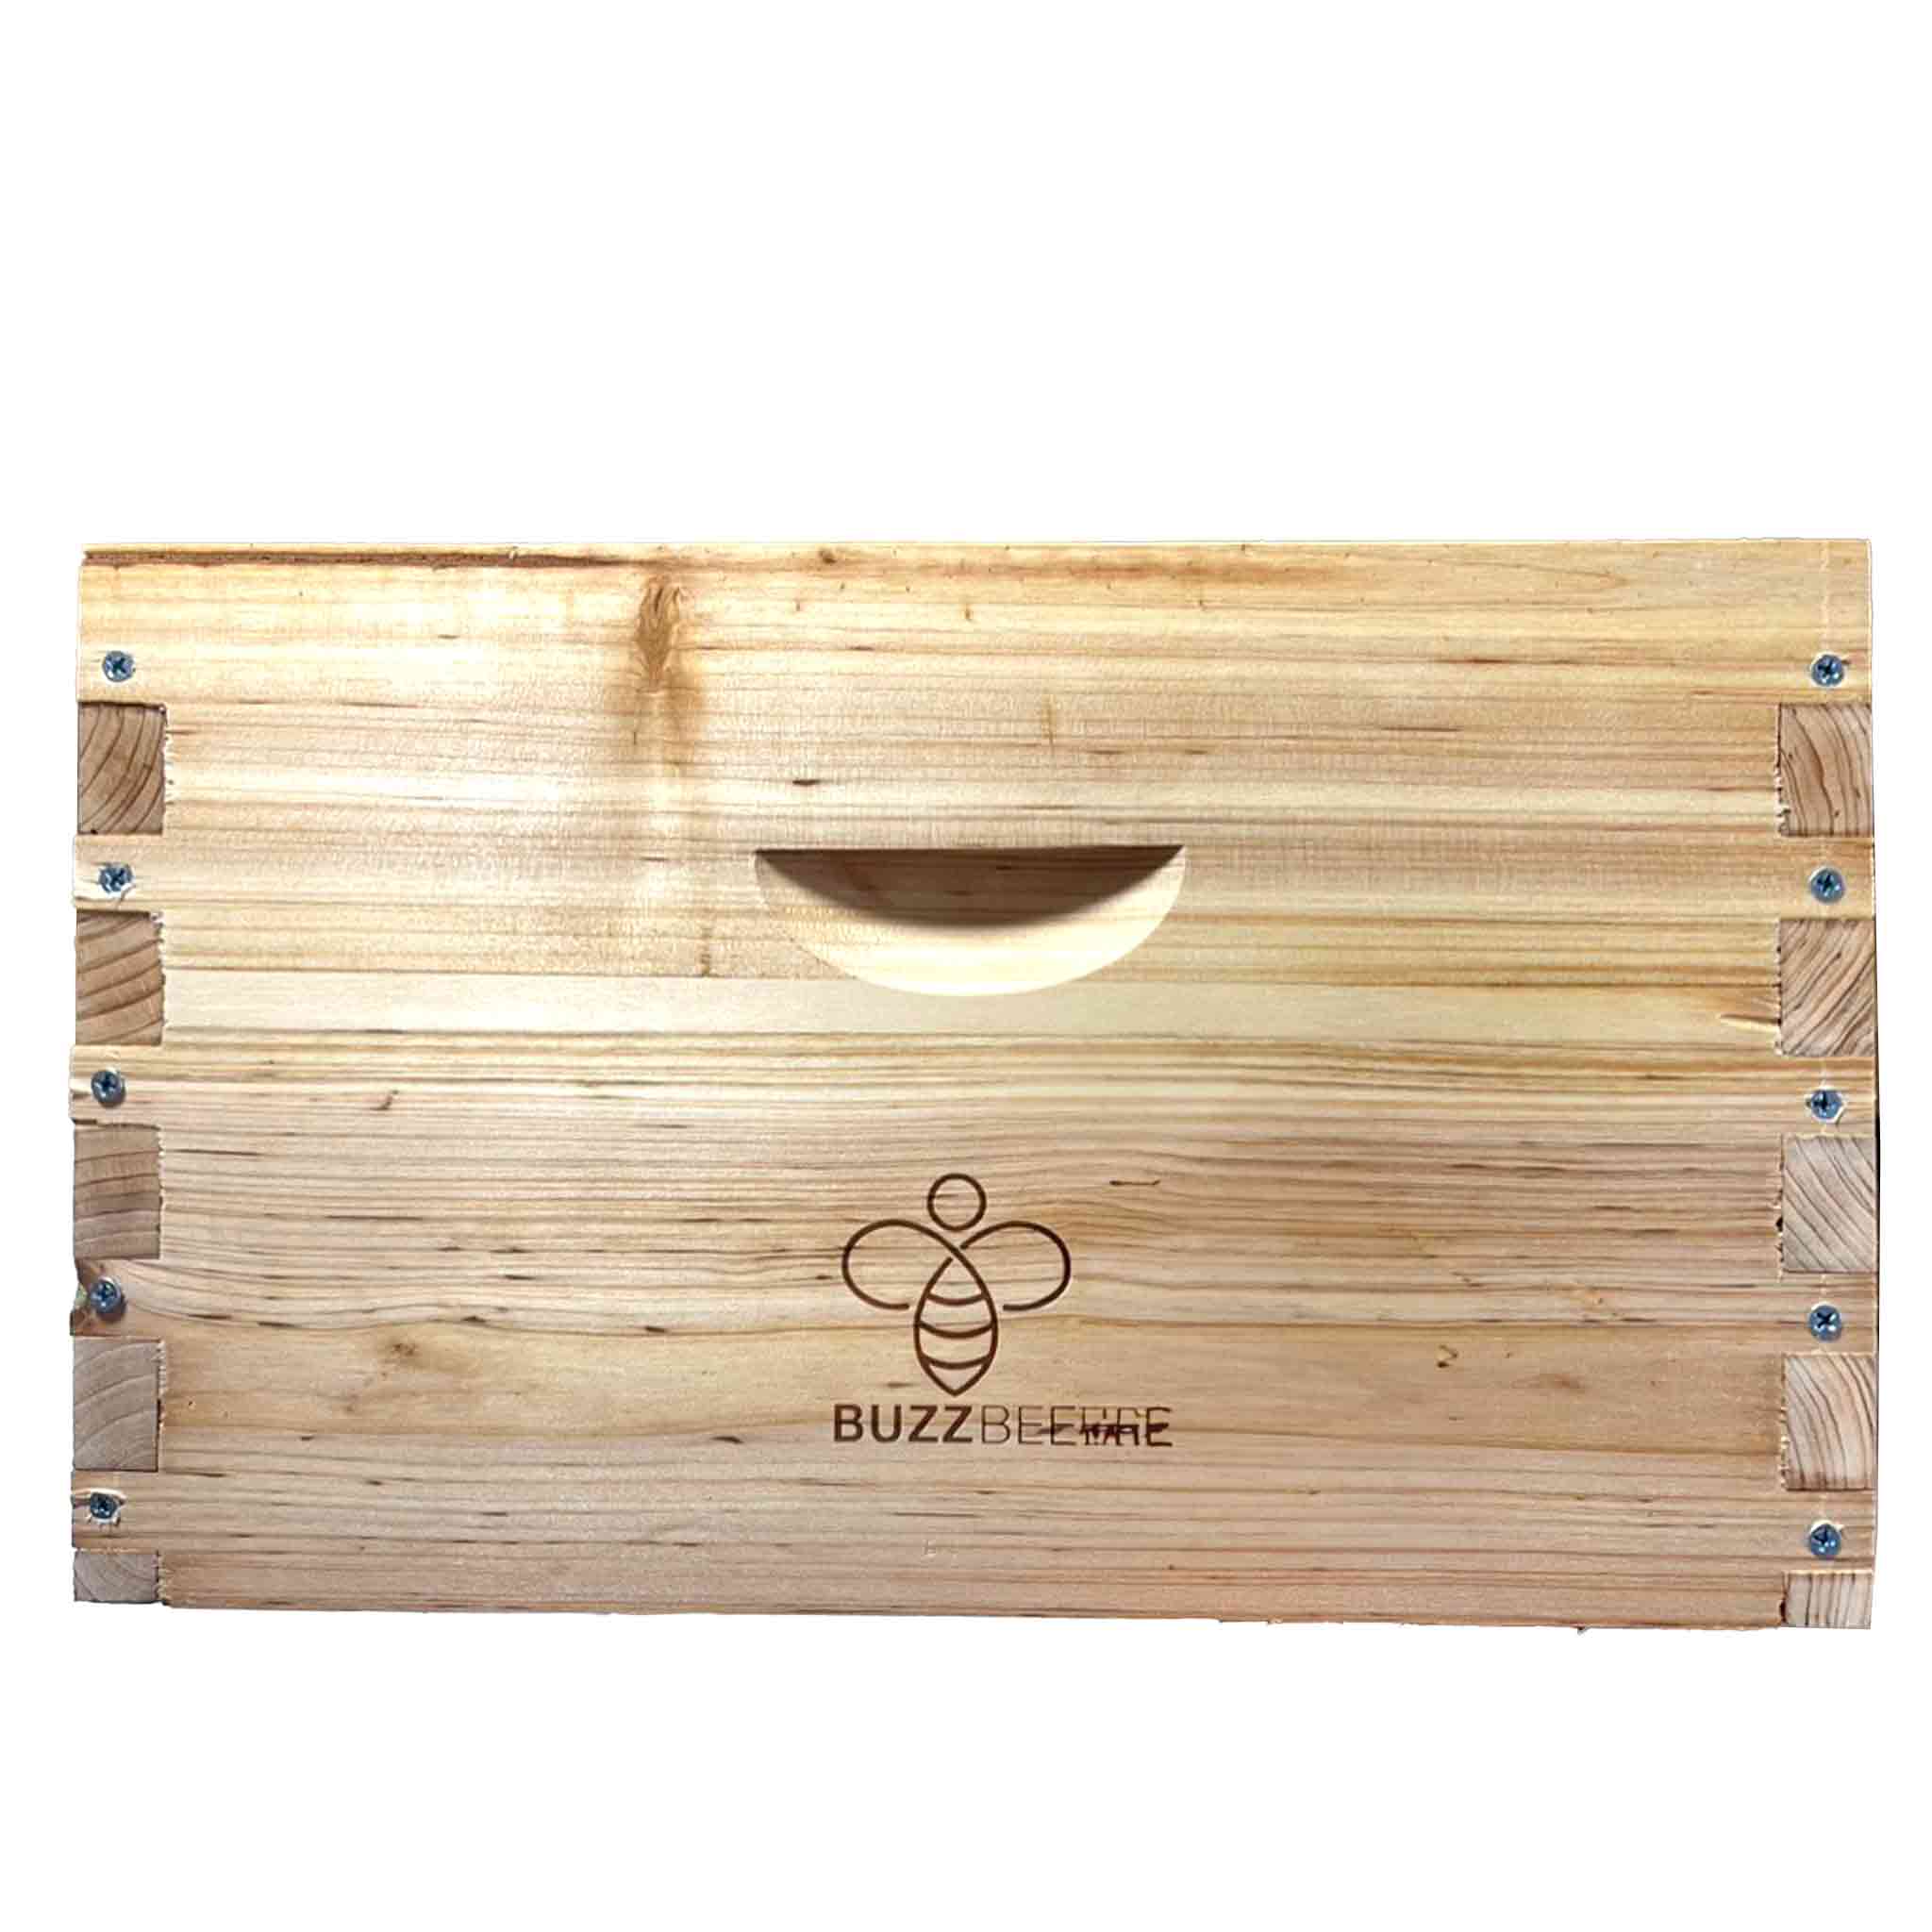 Commercial Hot Wax Dipped, Buzzbee Full Deep, Fir Super Box for Flow and Langstroth Beehives - Hive Parts collection by Buzzbee Beekeeping Supplies